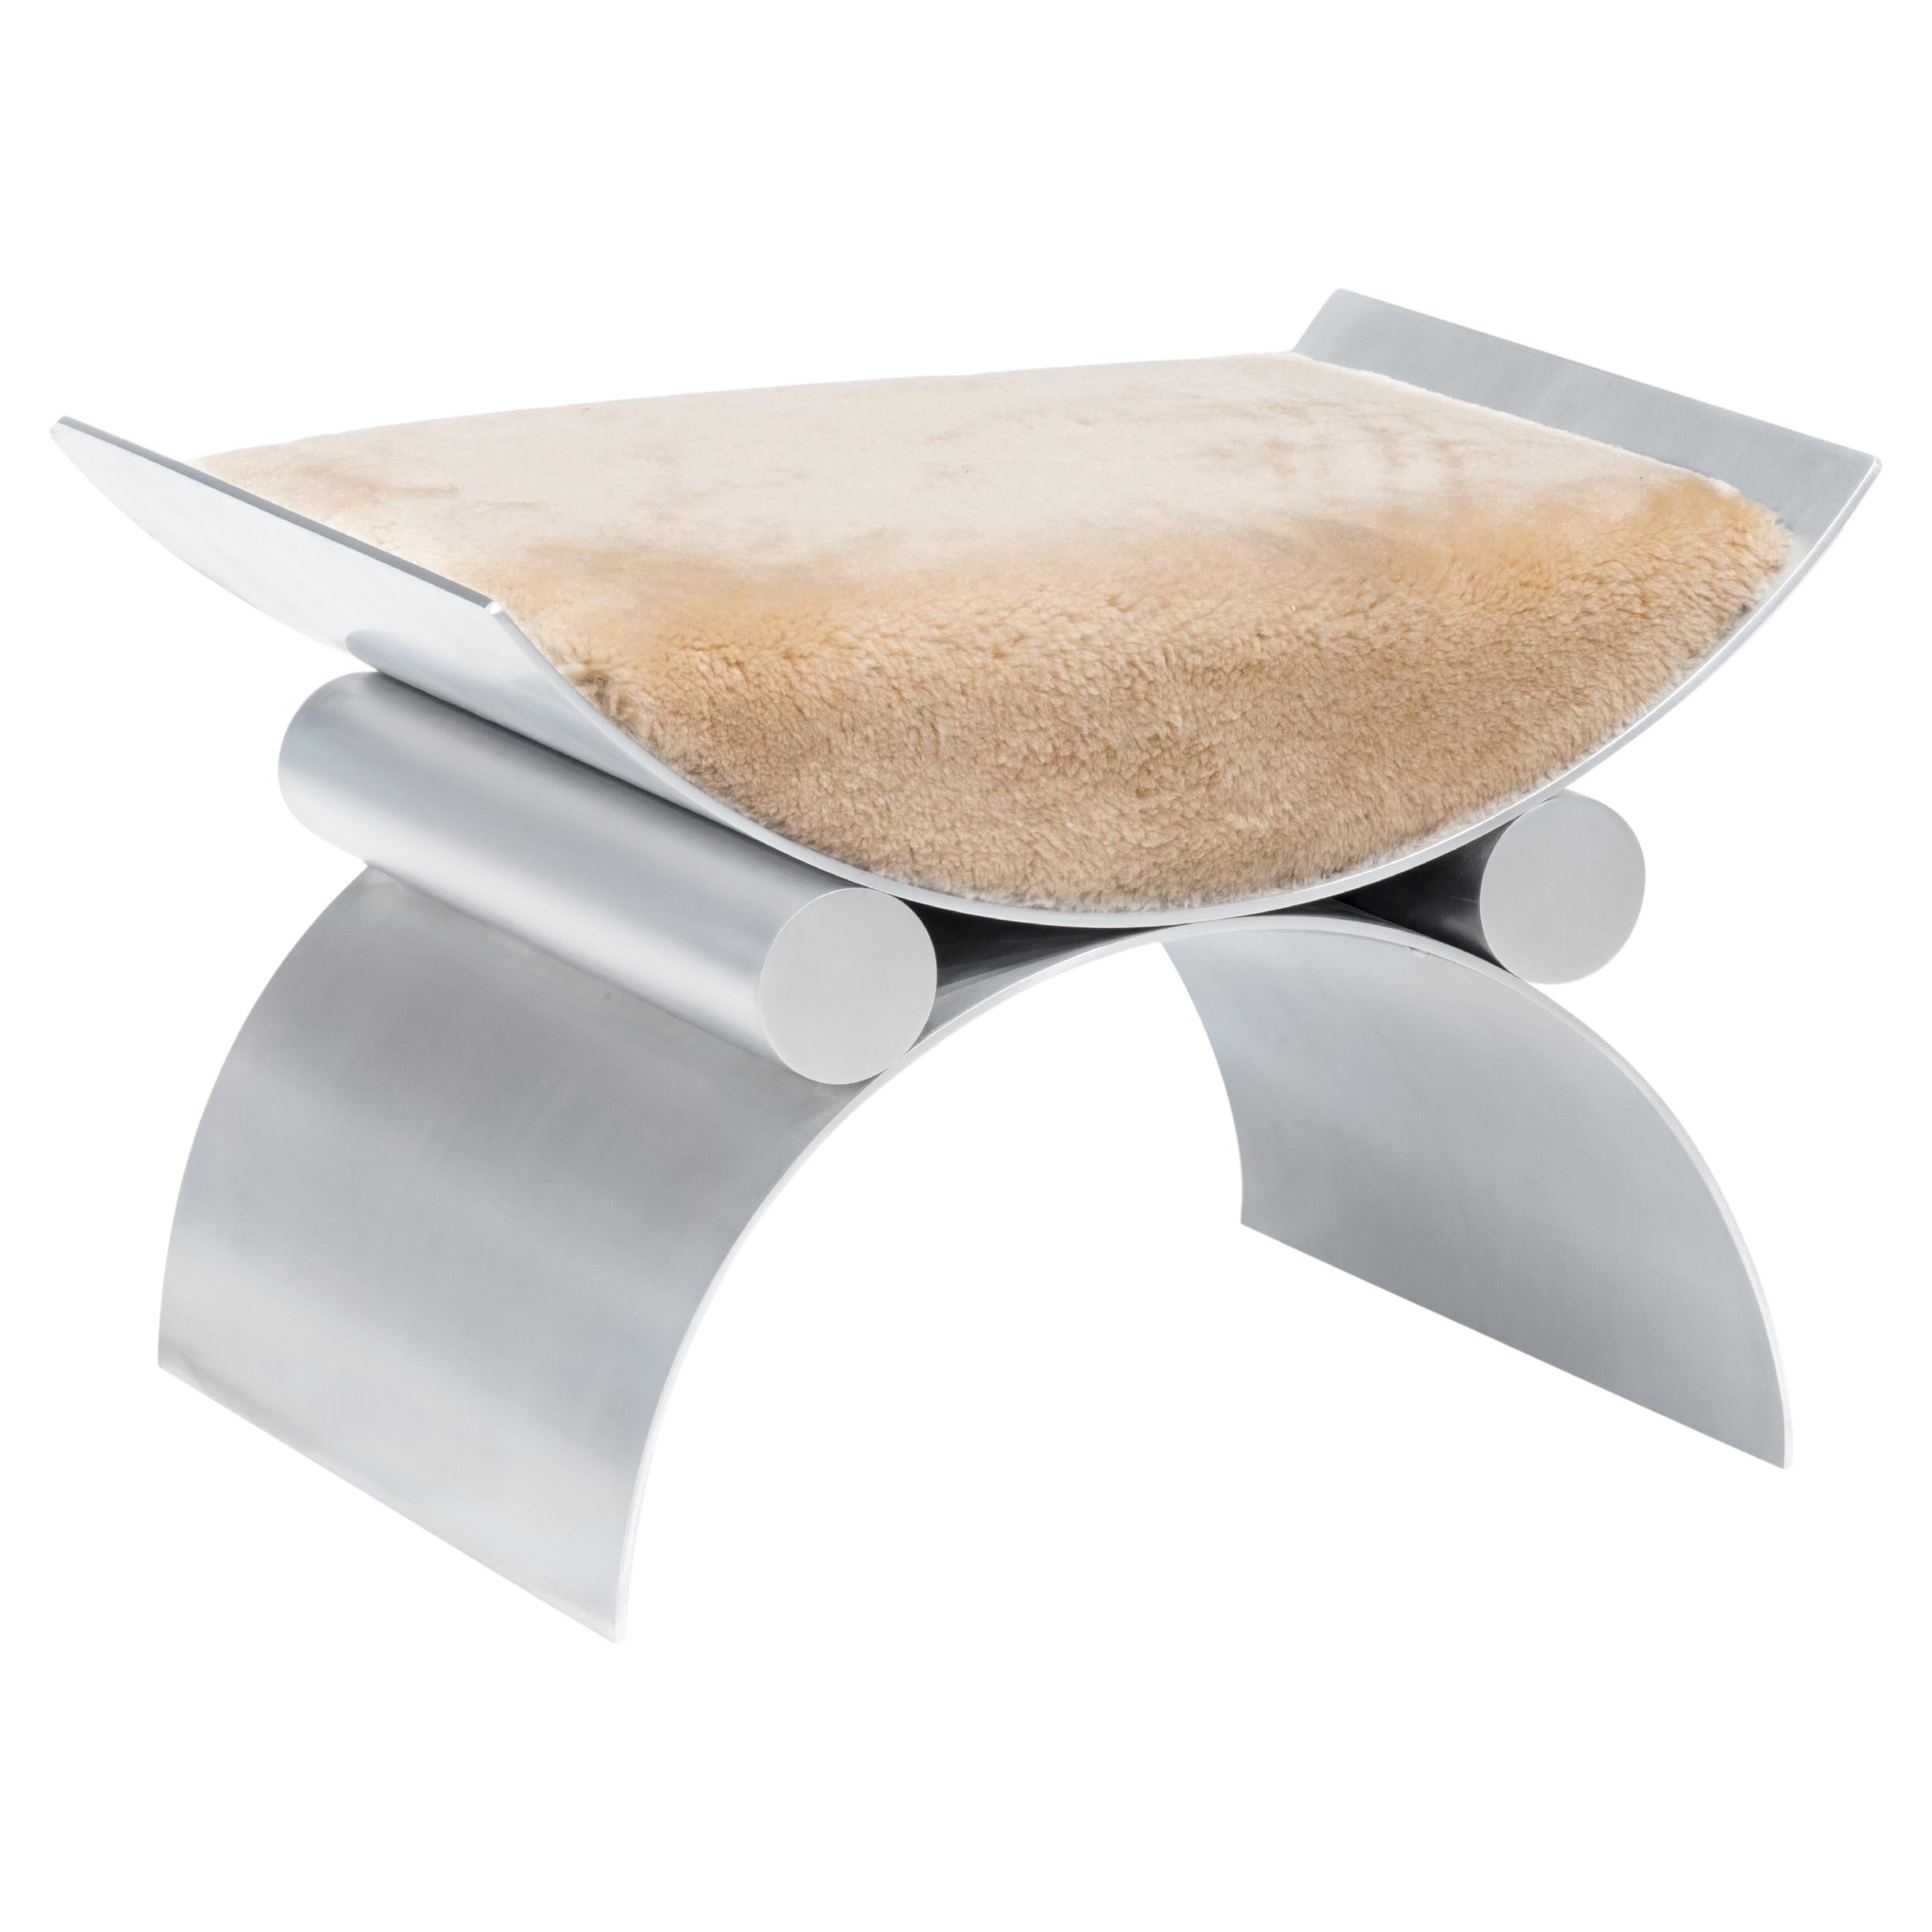 Polished Aluminum Magna Chair or Stool with Sheepskin Upholstery, Customizable